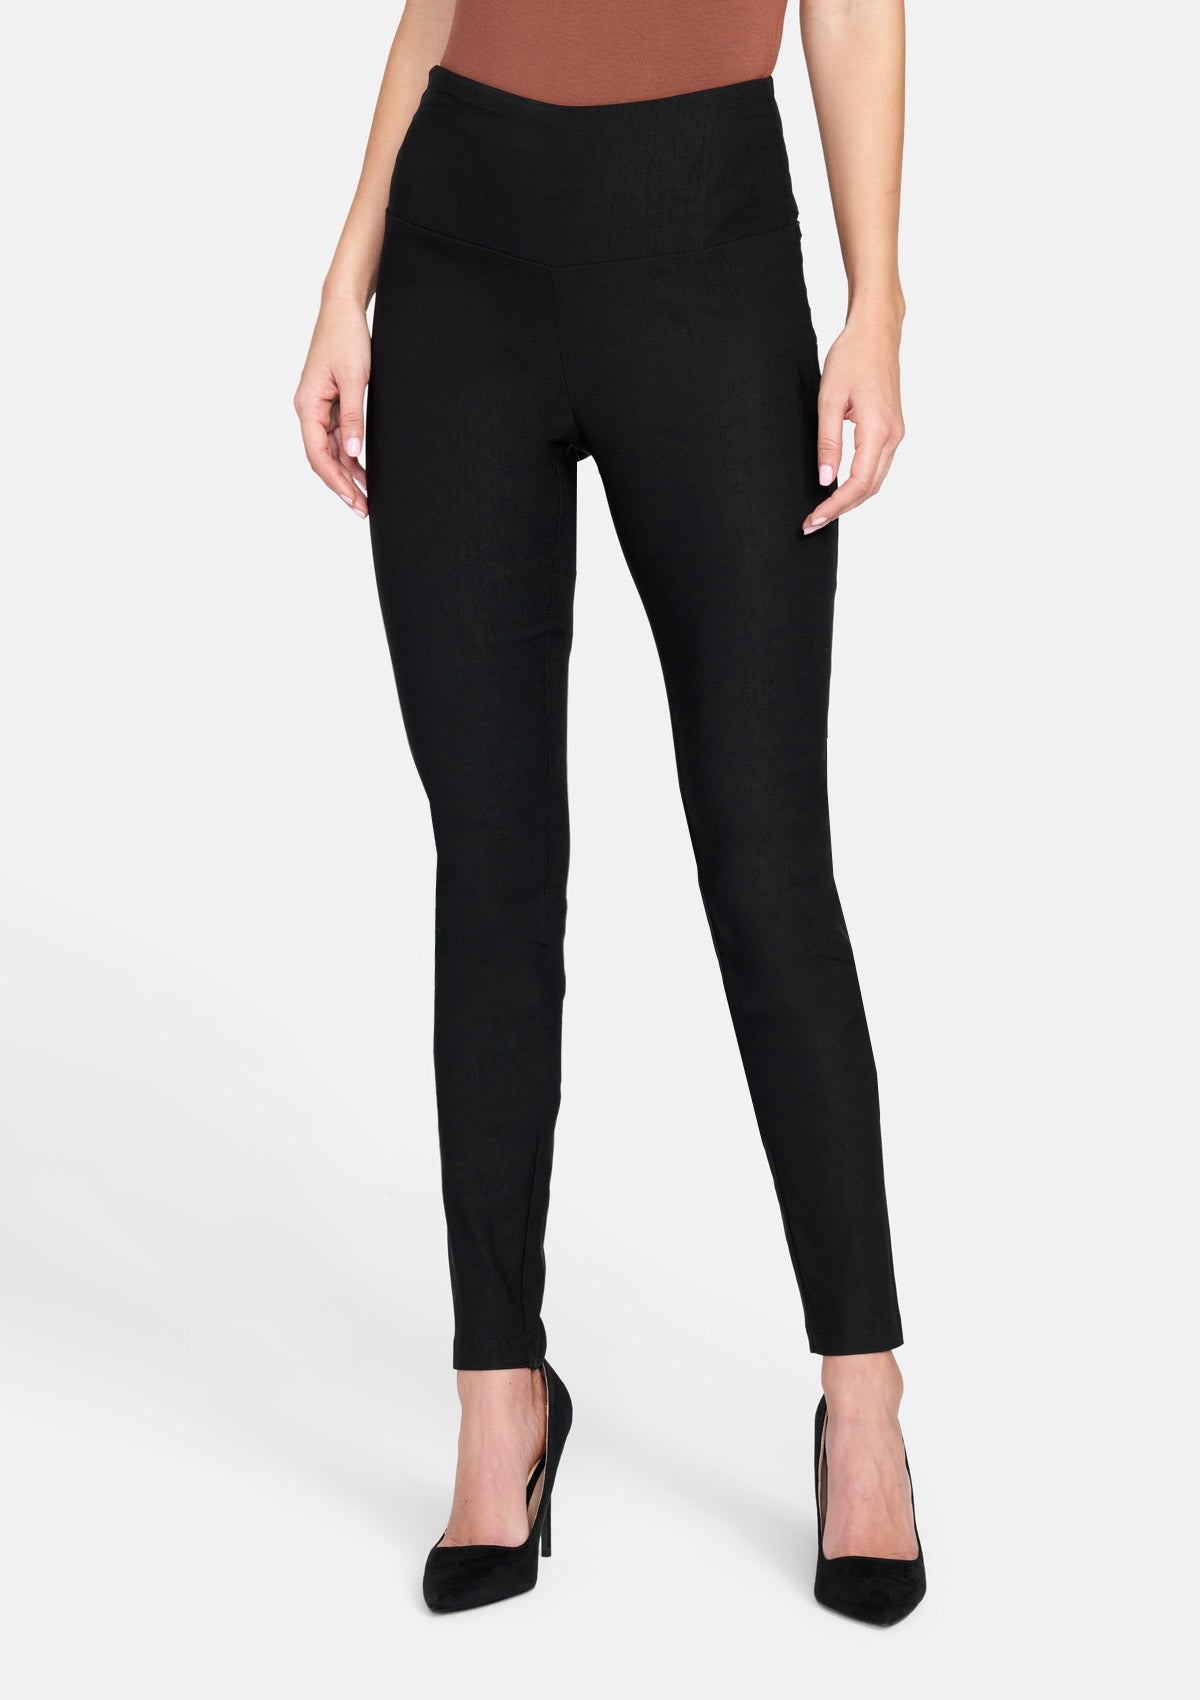 Tall Shannon Pixie Pants for Women in Black